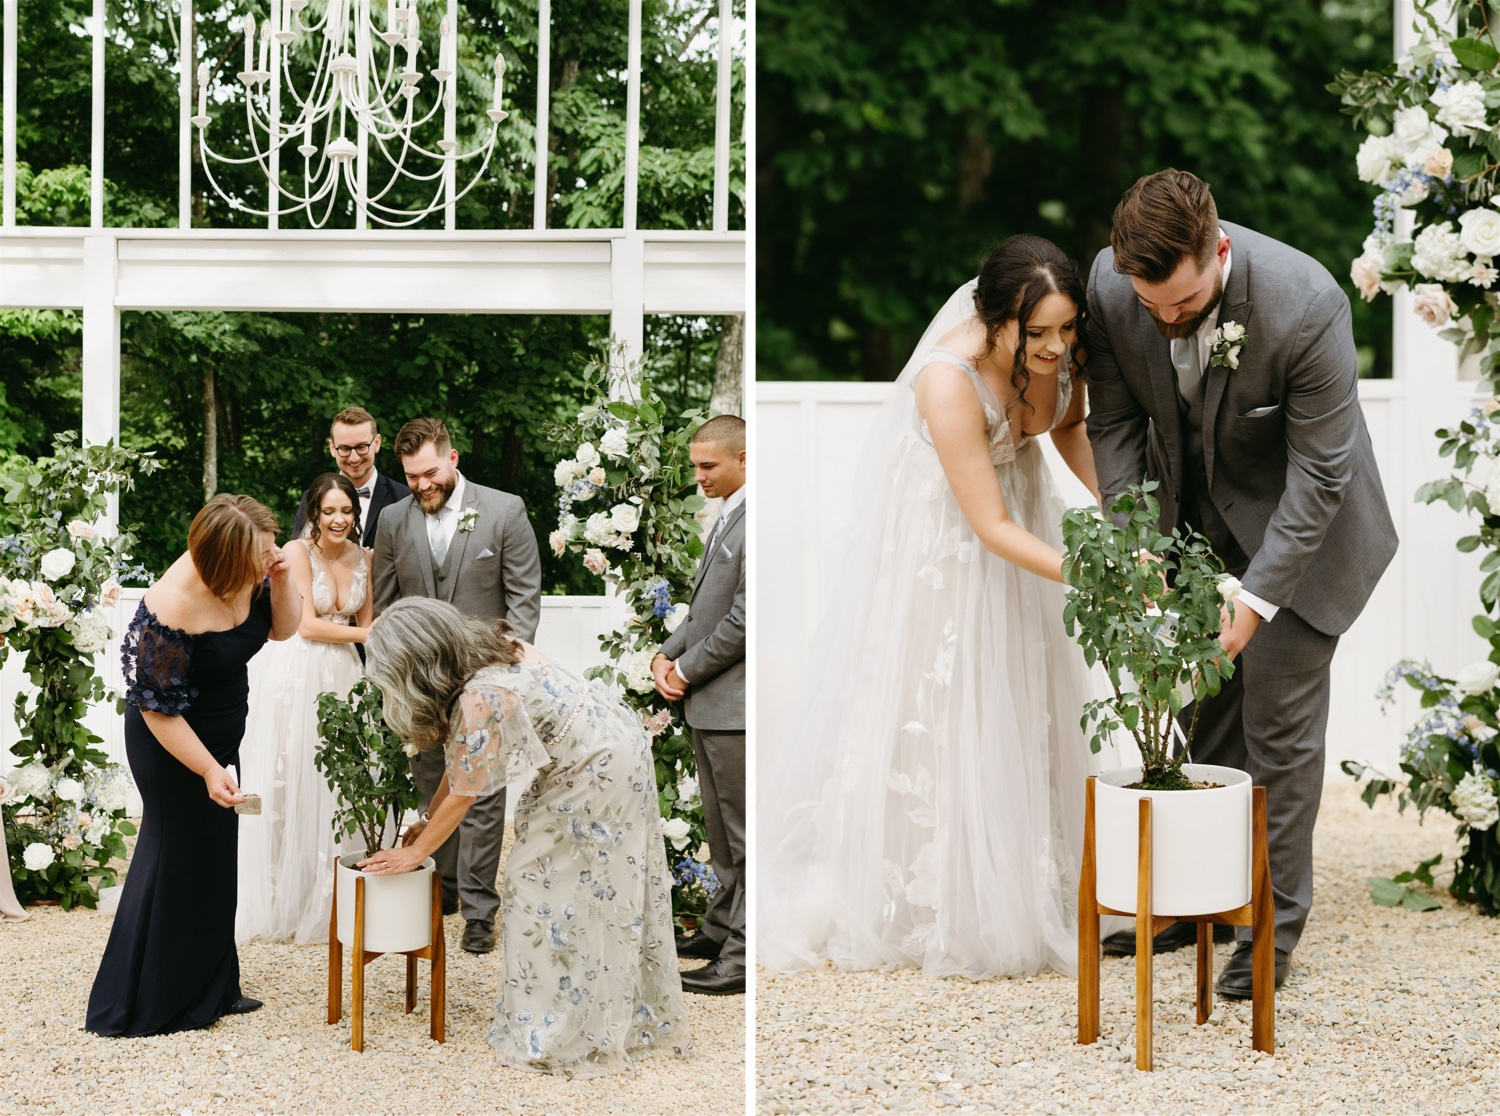 ivy rose barn bride and groom wedding tradition planting tree smiling